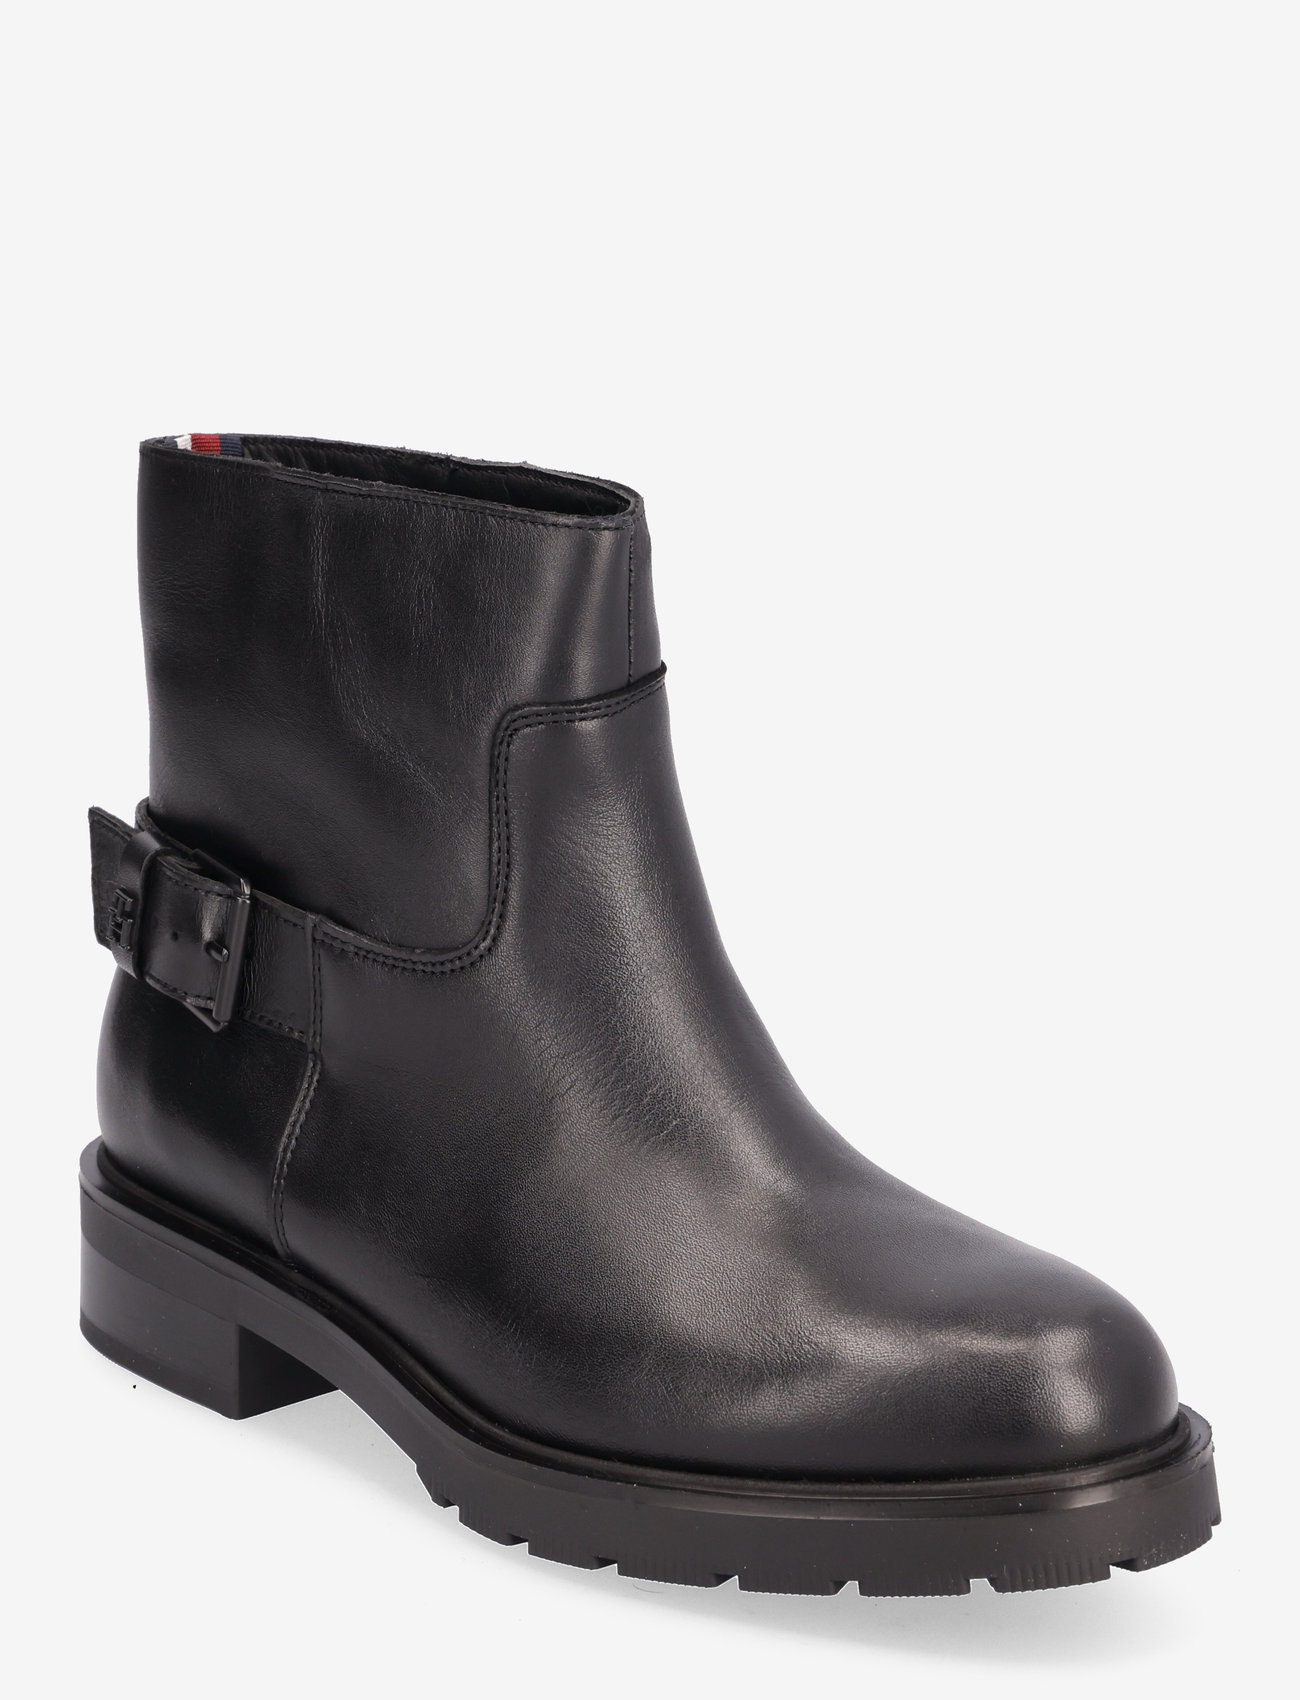 Tommy Hilfiger - TH MONOCHROMATIC BIKERBOOT - flat ankle boots - black - 0